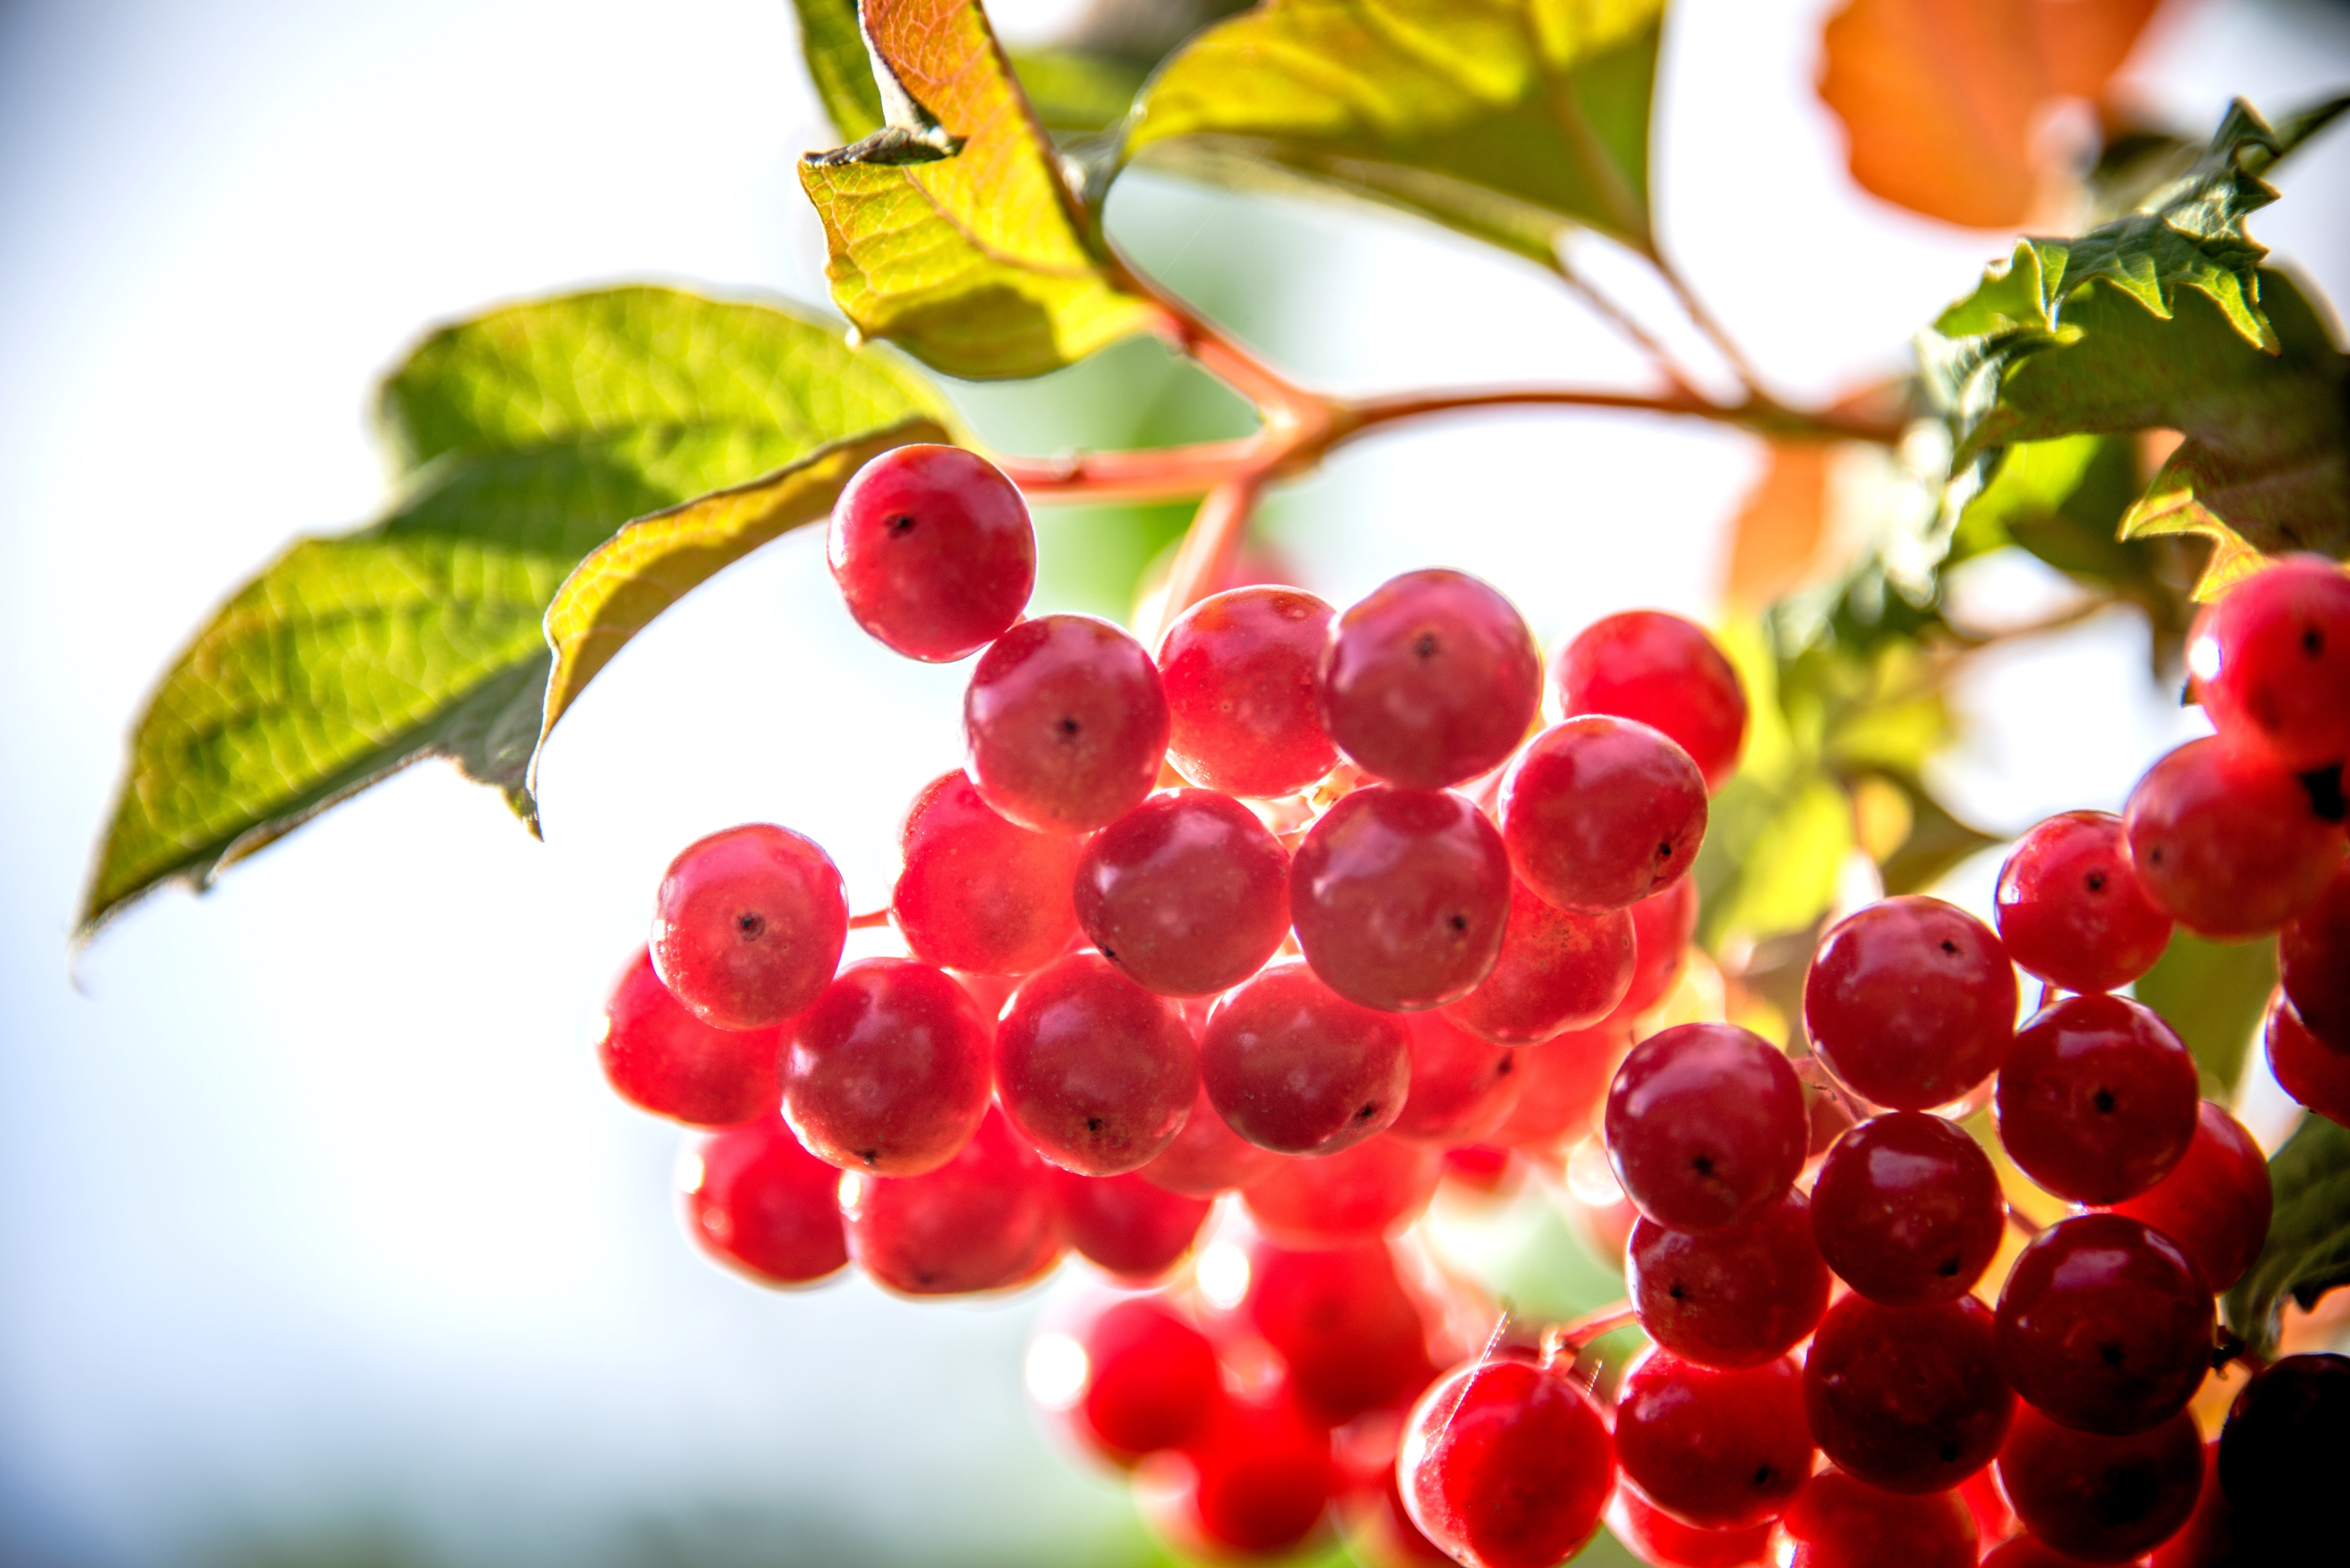 Berry, Plants, Sun, Backlight, fruit, food and drink